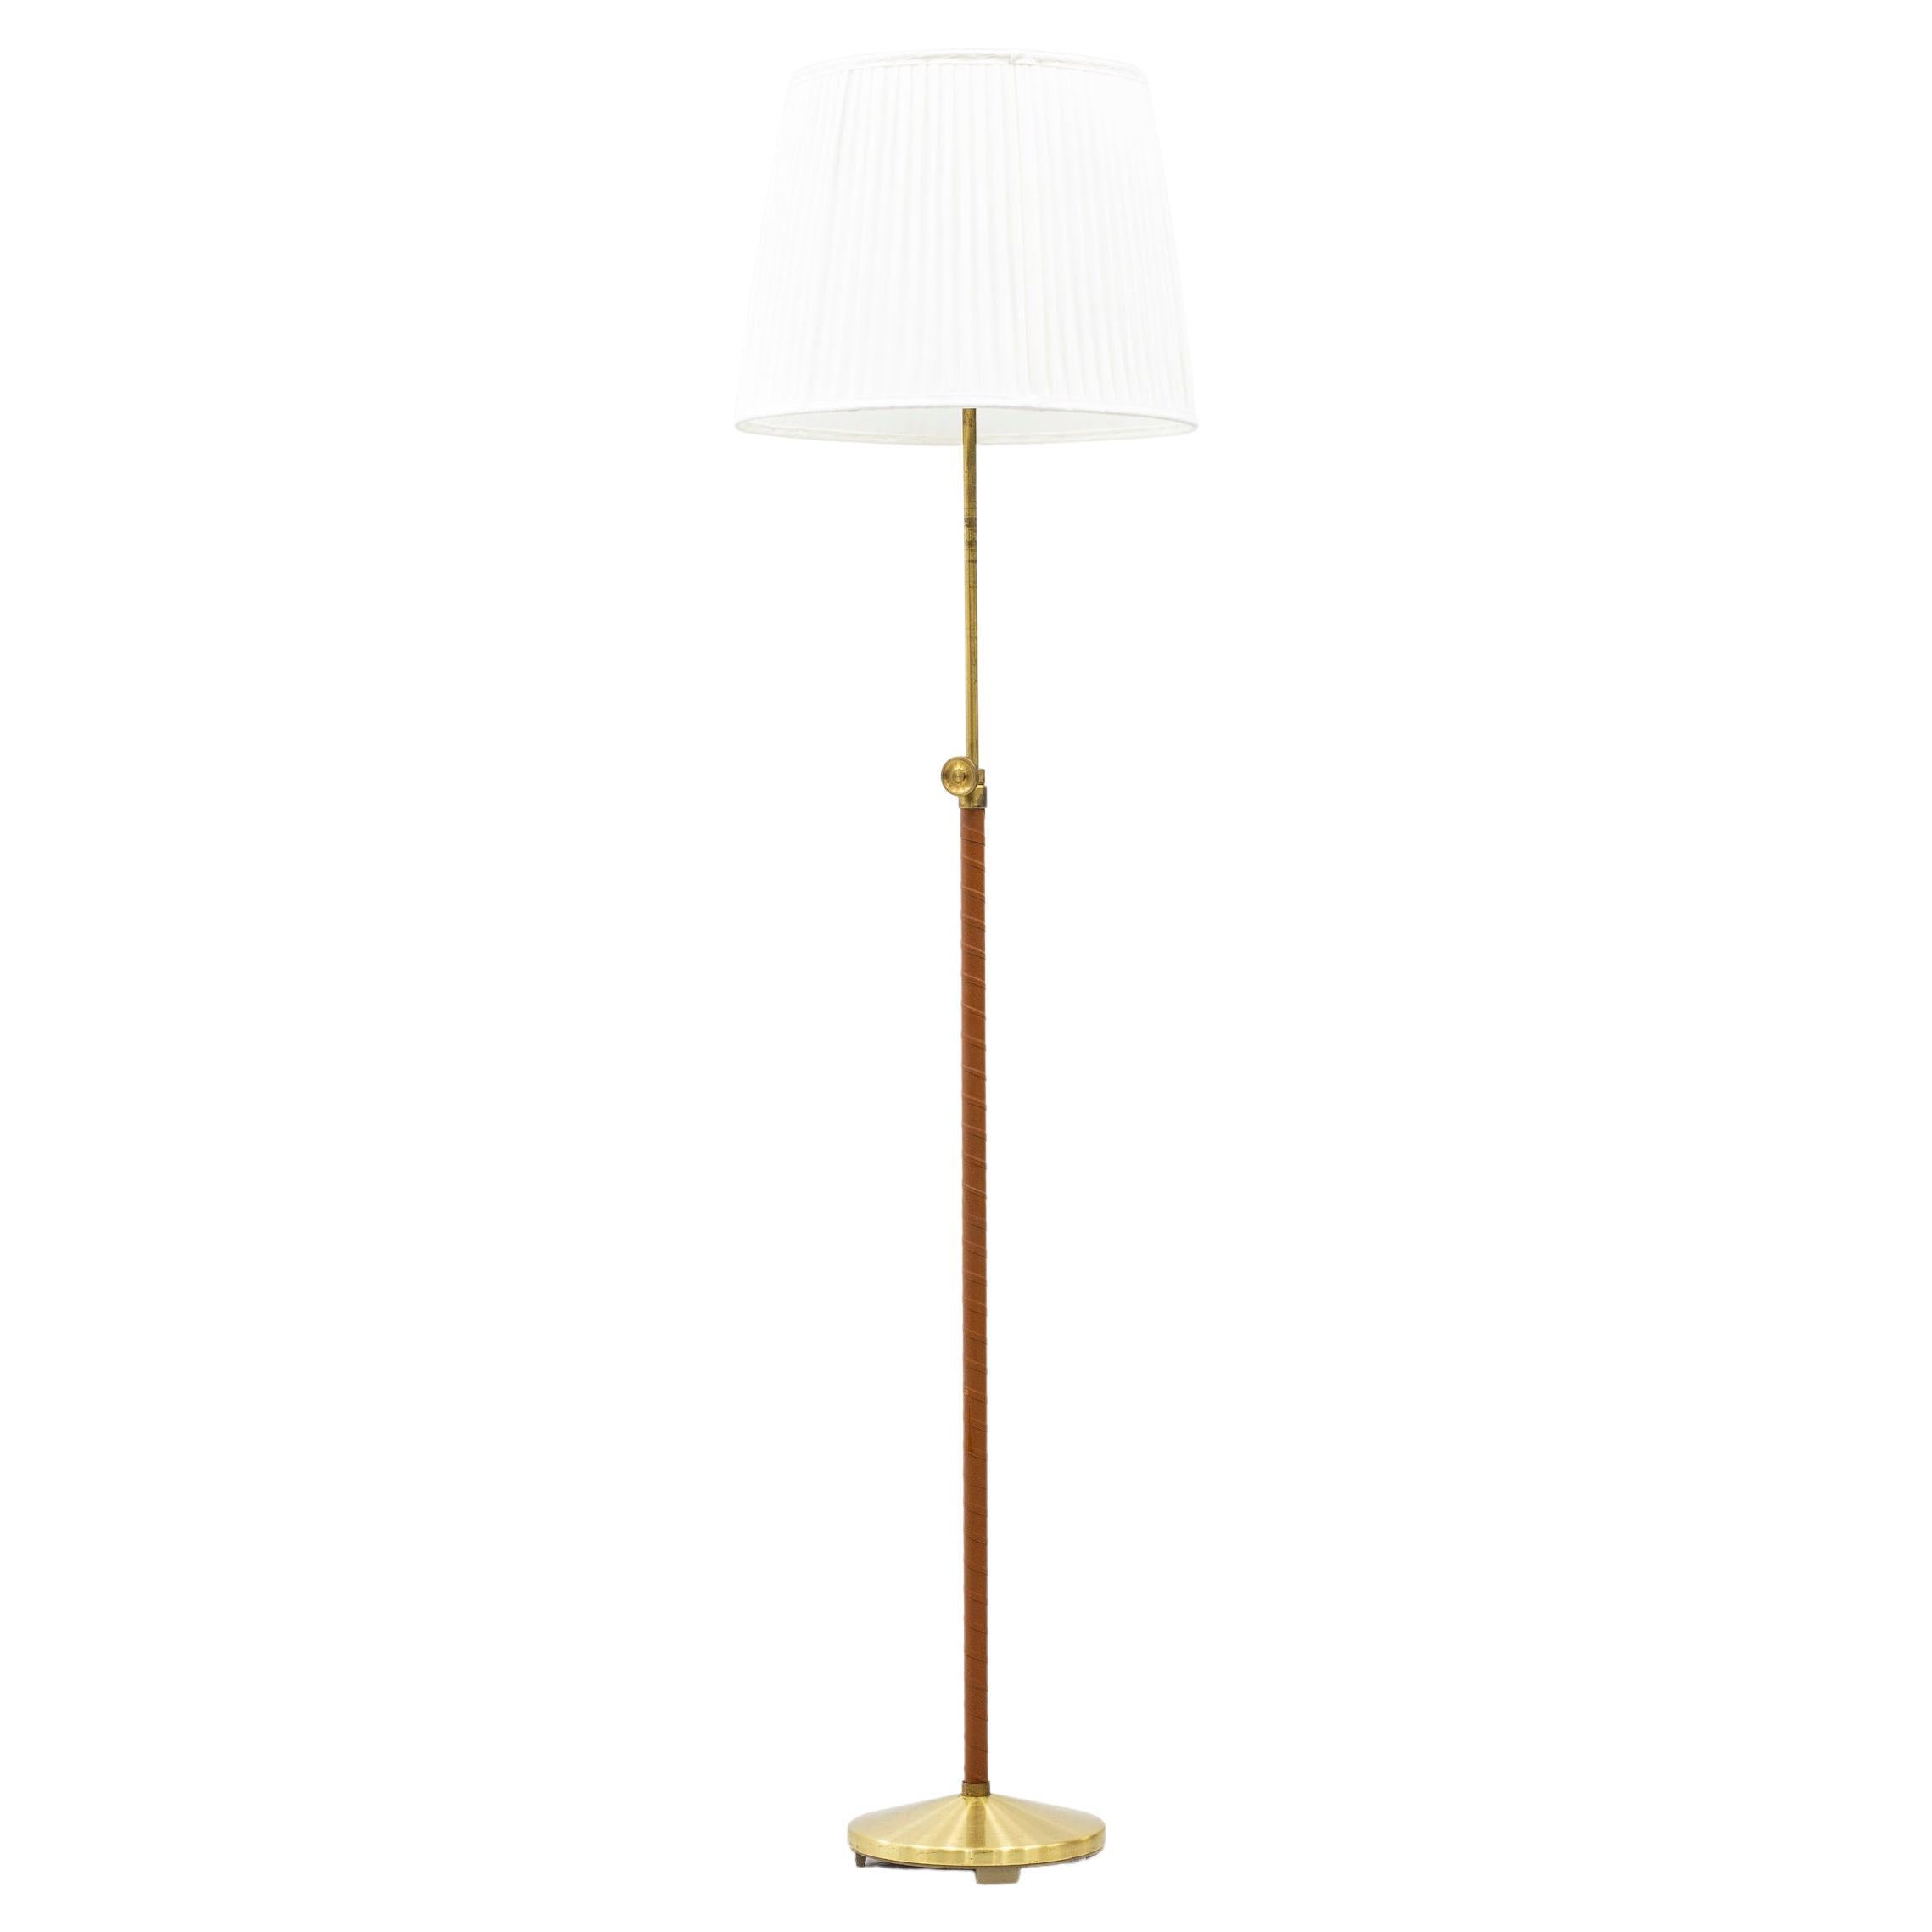 Swedish Leather and Brass Floor Lamp by ASEA, Sweden, 1950s